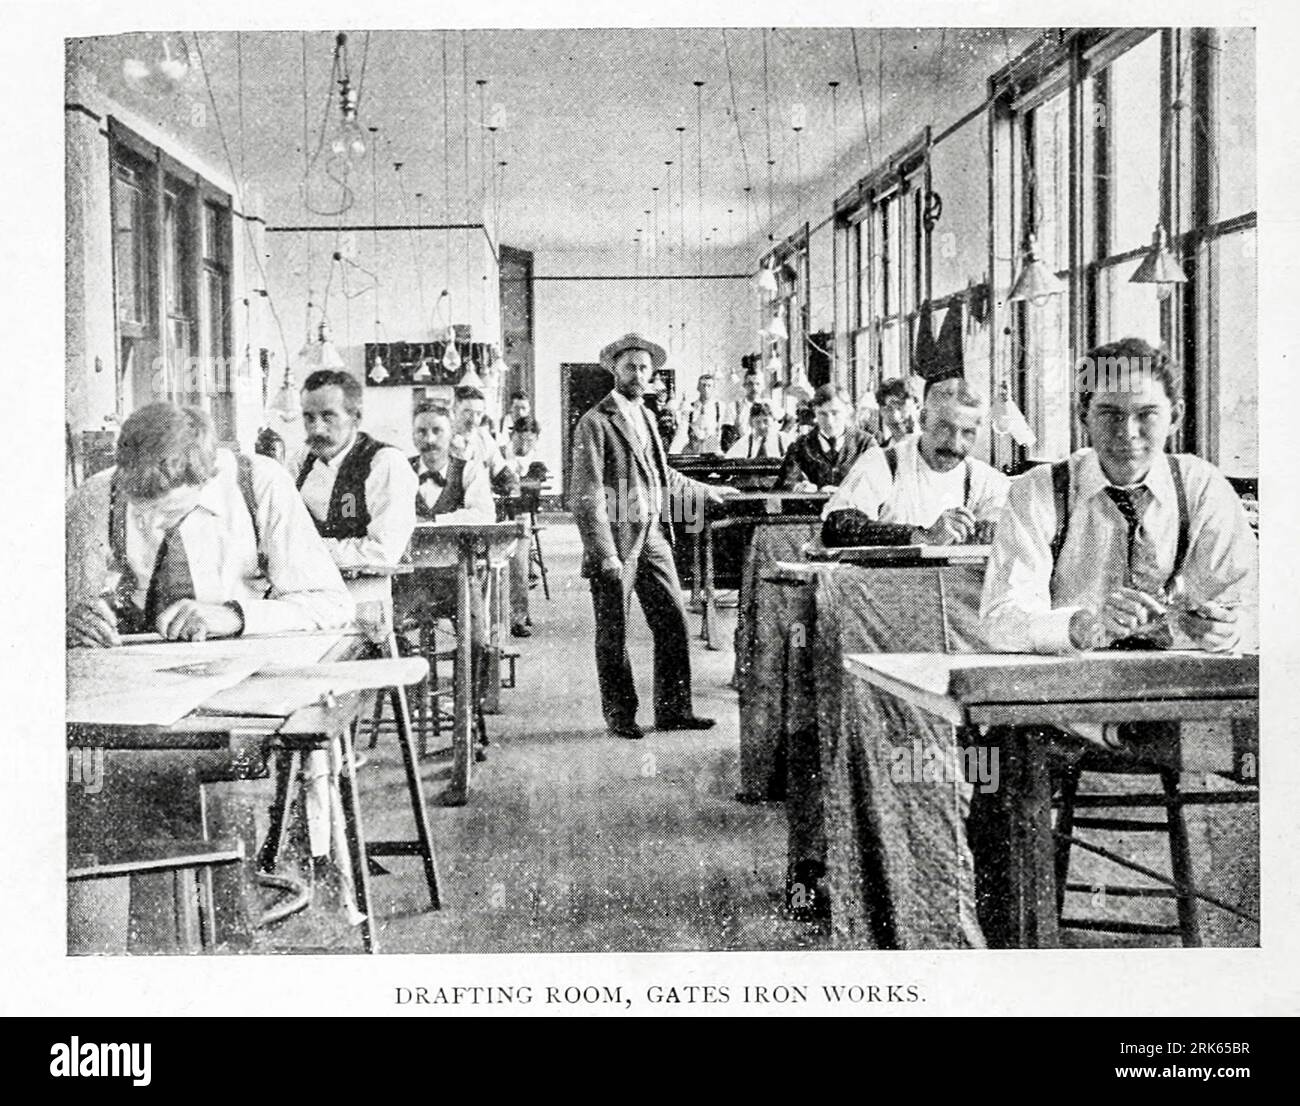 Drafting Room Gates Iron Works, Chicago, Illinois from the Article MODERN MACHINE-SHOP ECONOMICS PRIME REQUISITES OF SHOP CONSTRUCTION By Horace L. Arnold from The Engineering Magazine DEVOTED TO INDUSTRIAL PROGRESS Volume XI October 1896 NEW YORK The Engineering Magazine Co Stock Photo